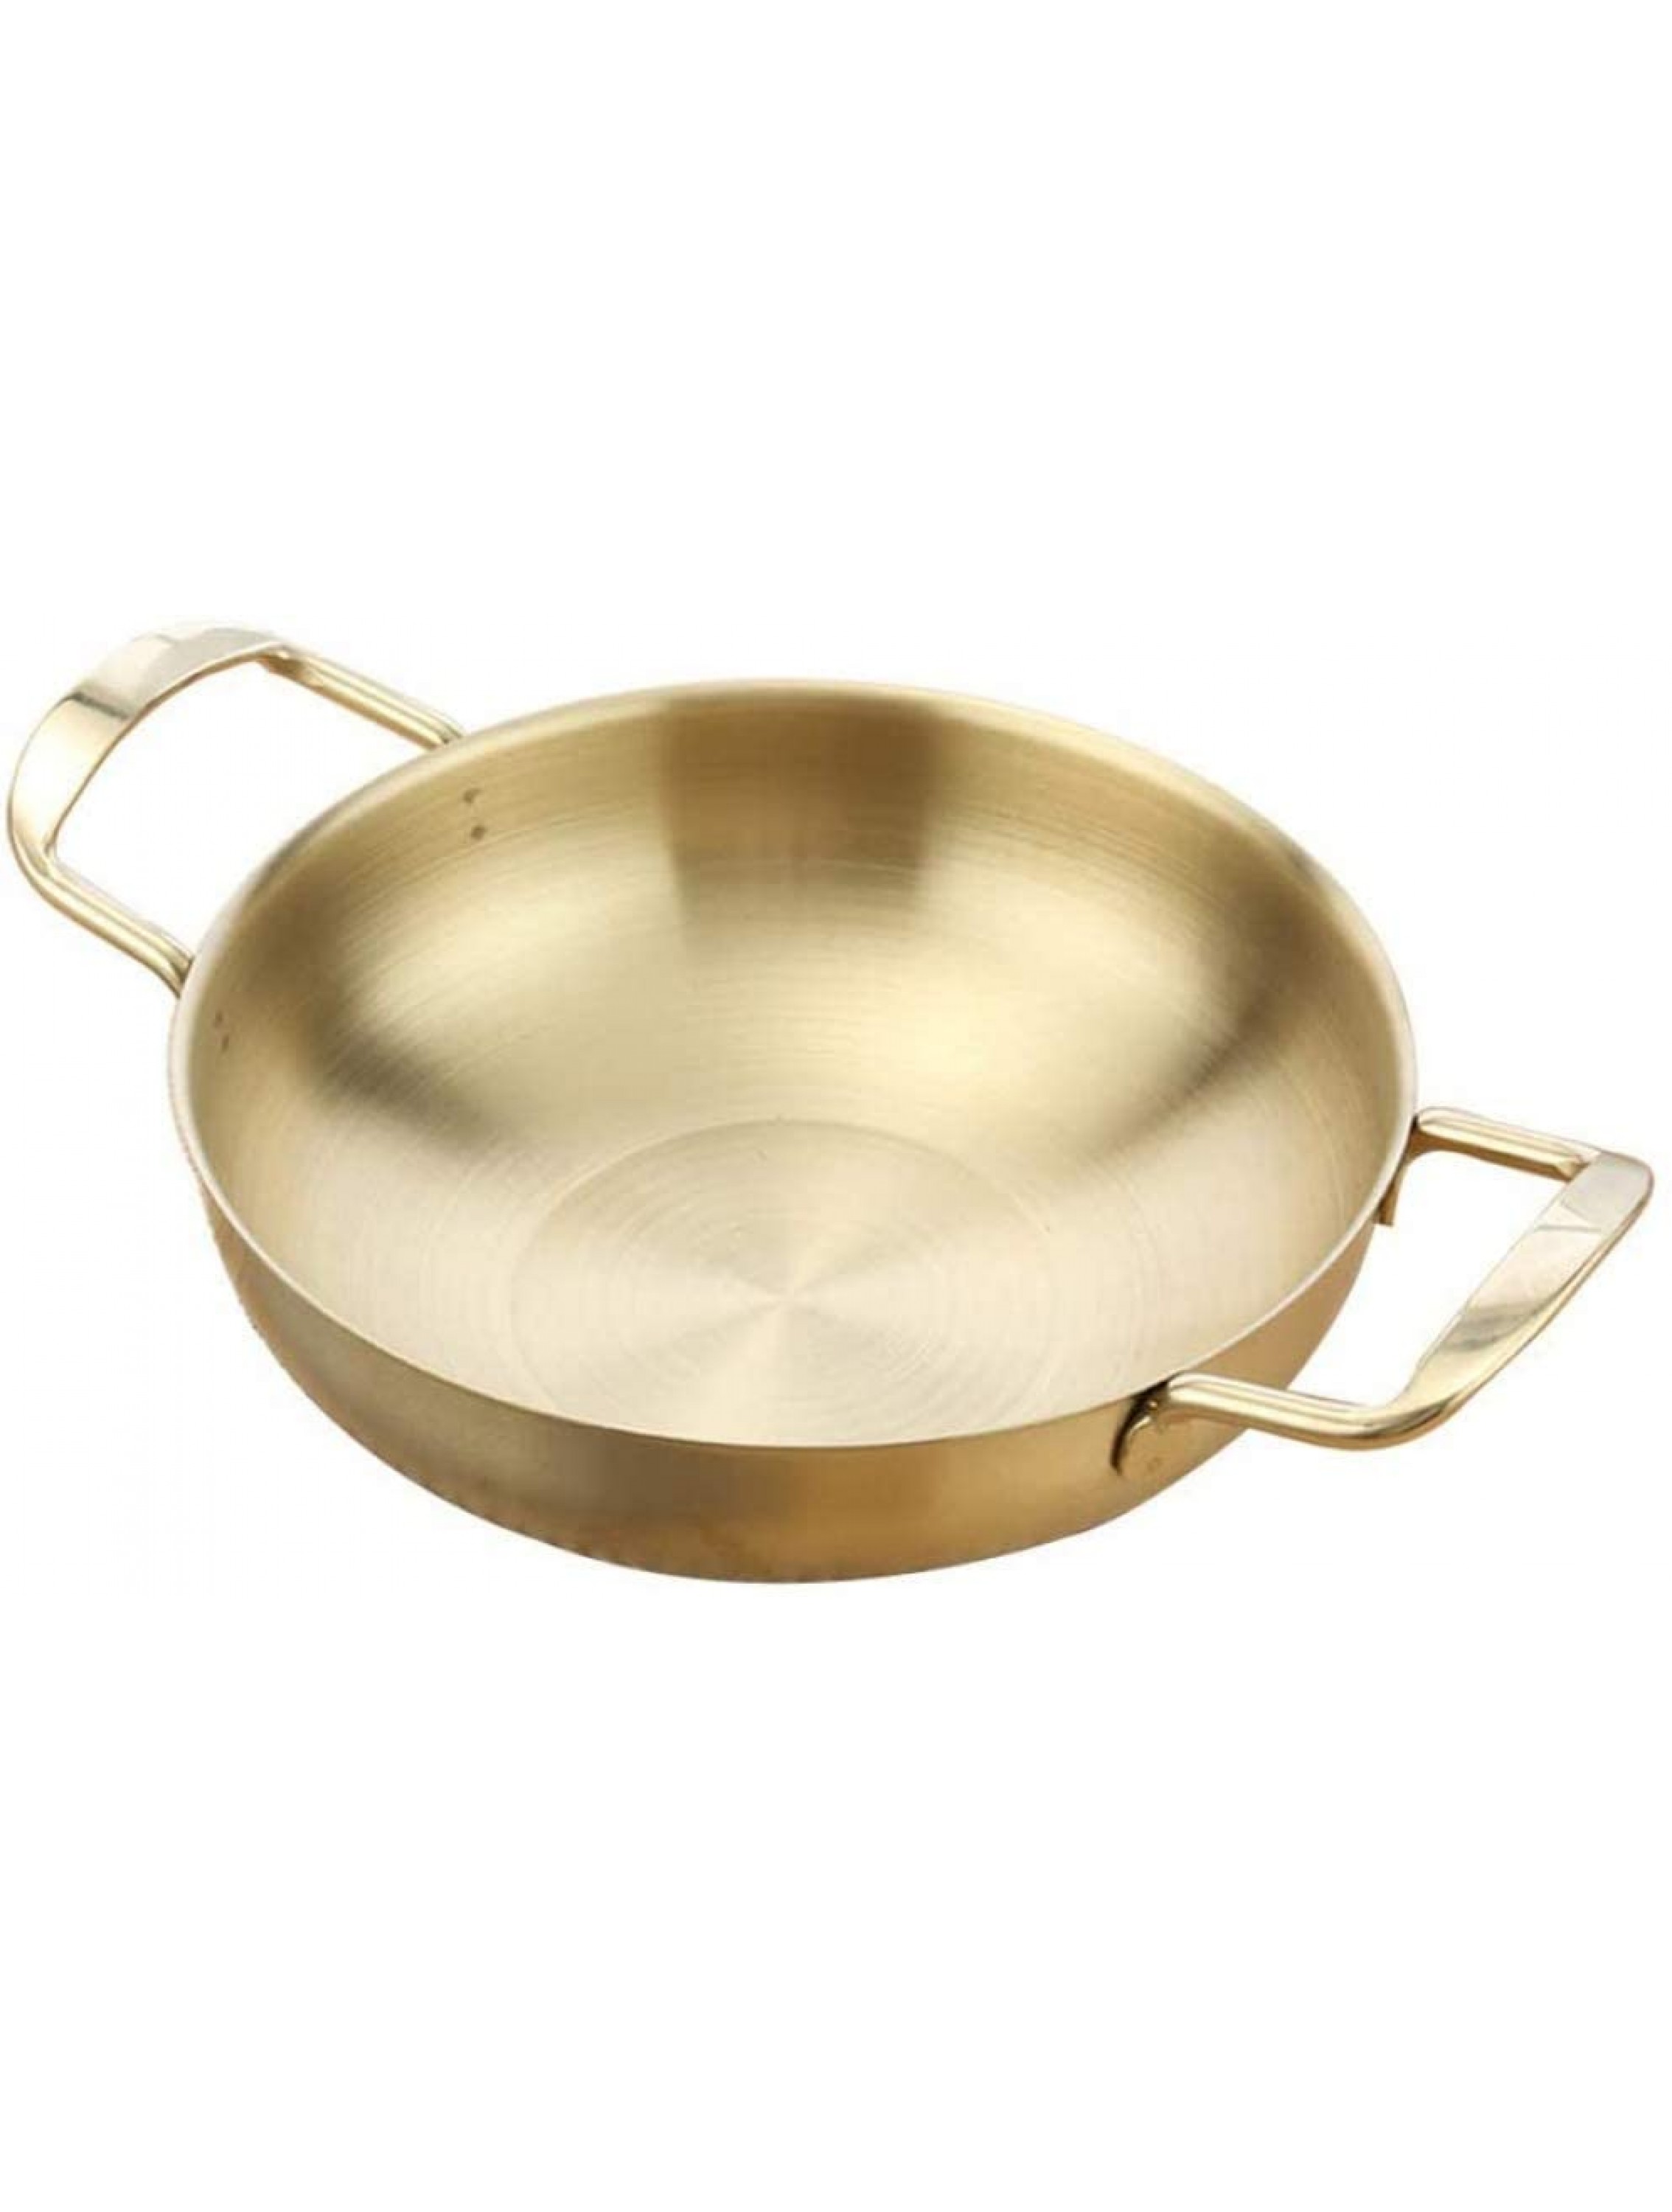 TSTSM Professional Non-Stick Stainless Steel Paella Pan Widened Handle Non-Slip Bottom Universal for All Heating Sources for Home,Restaurant-Golden||20cm - BPRT4I1ES